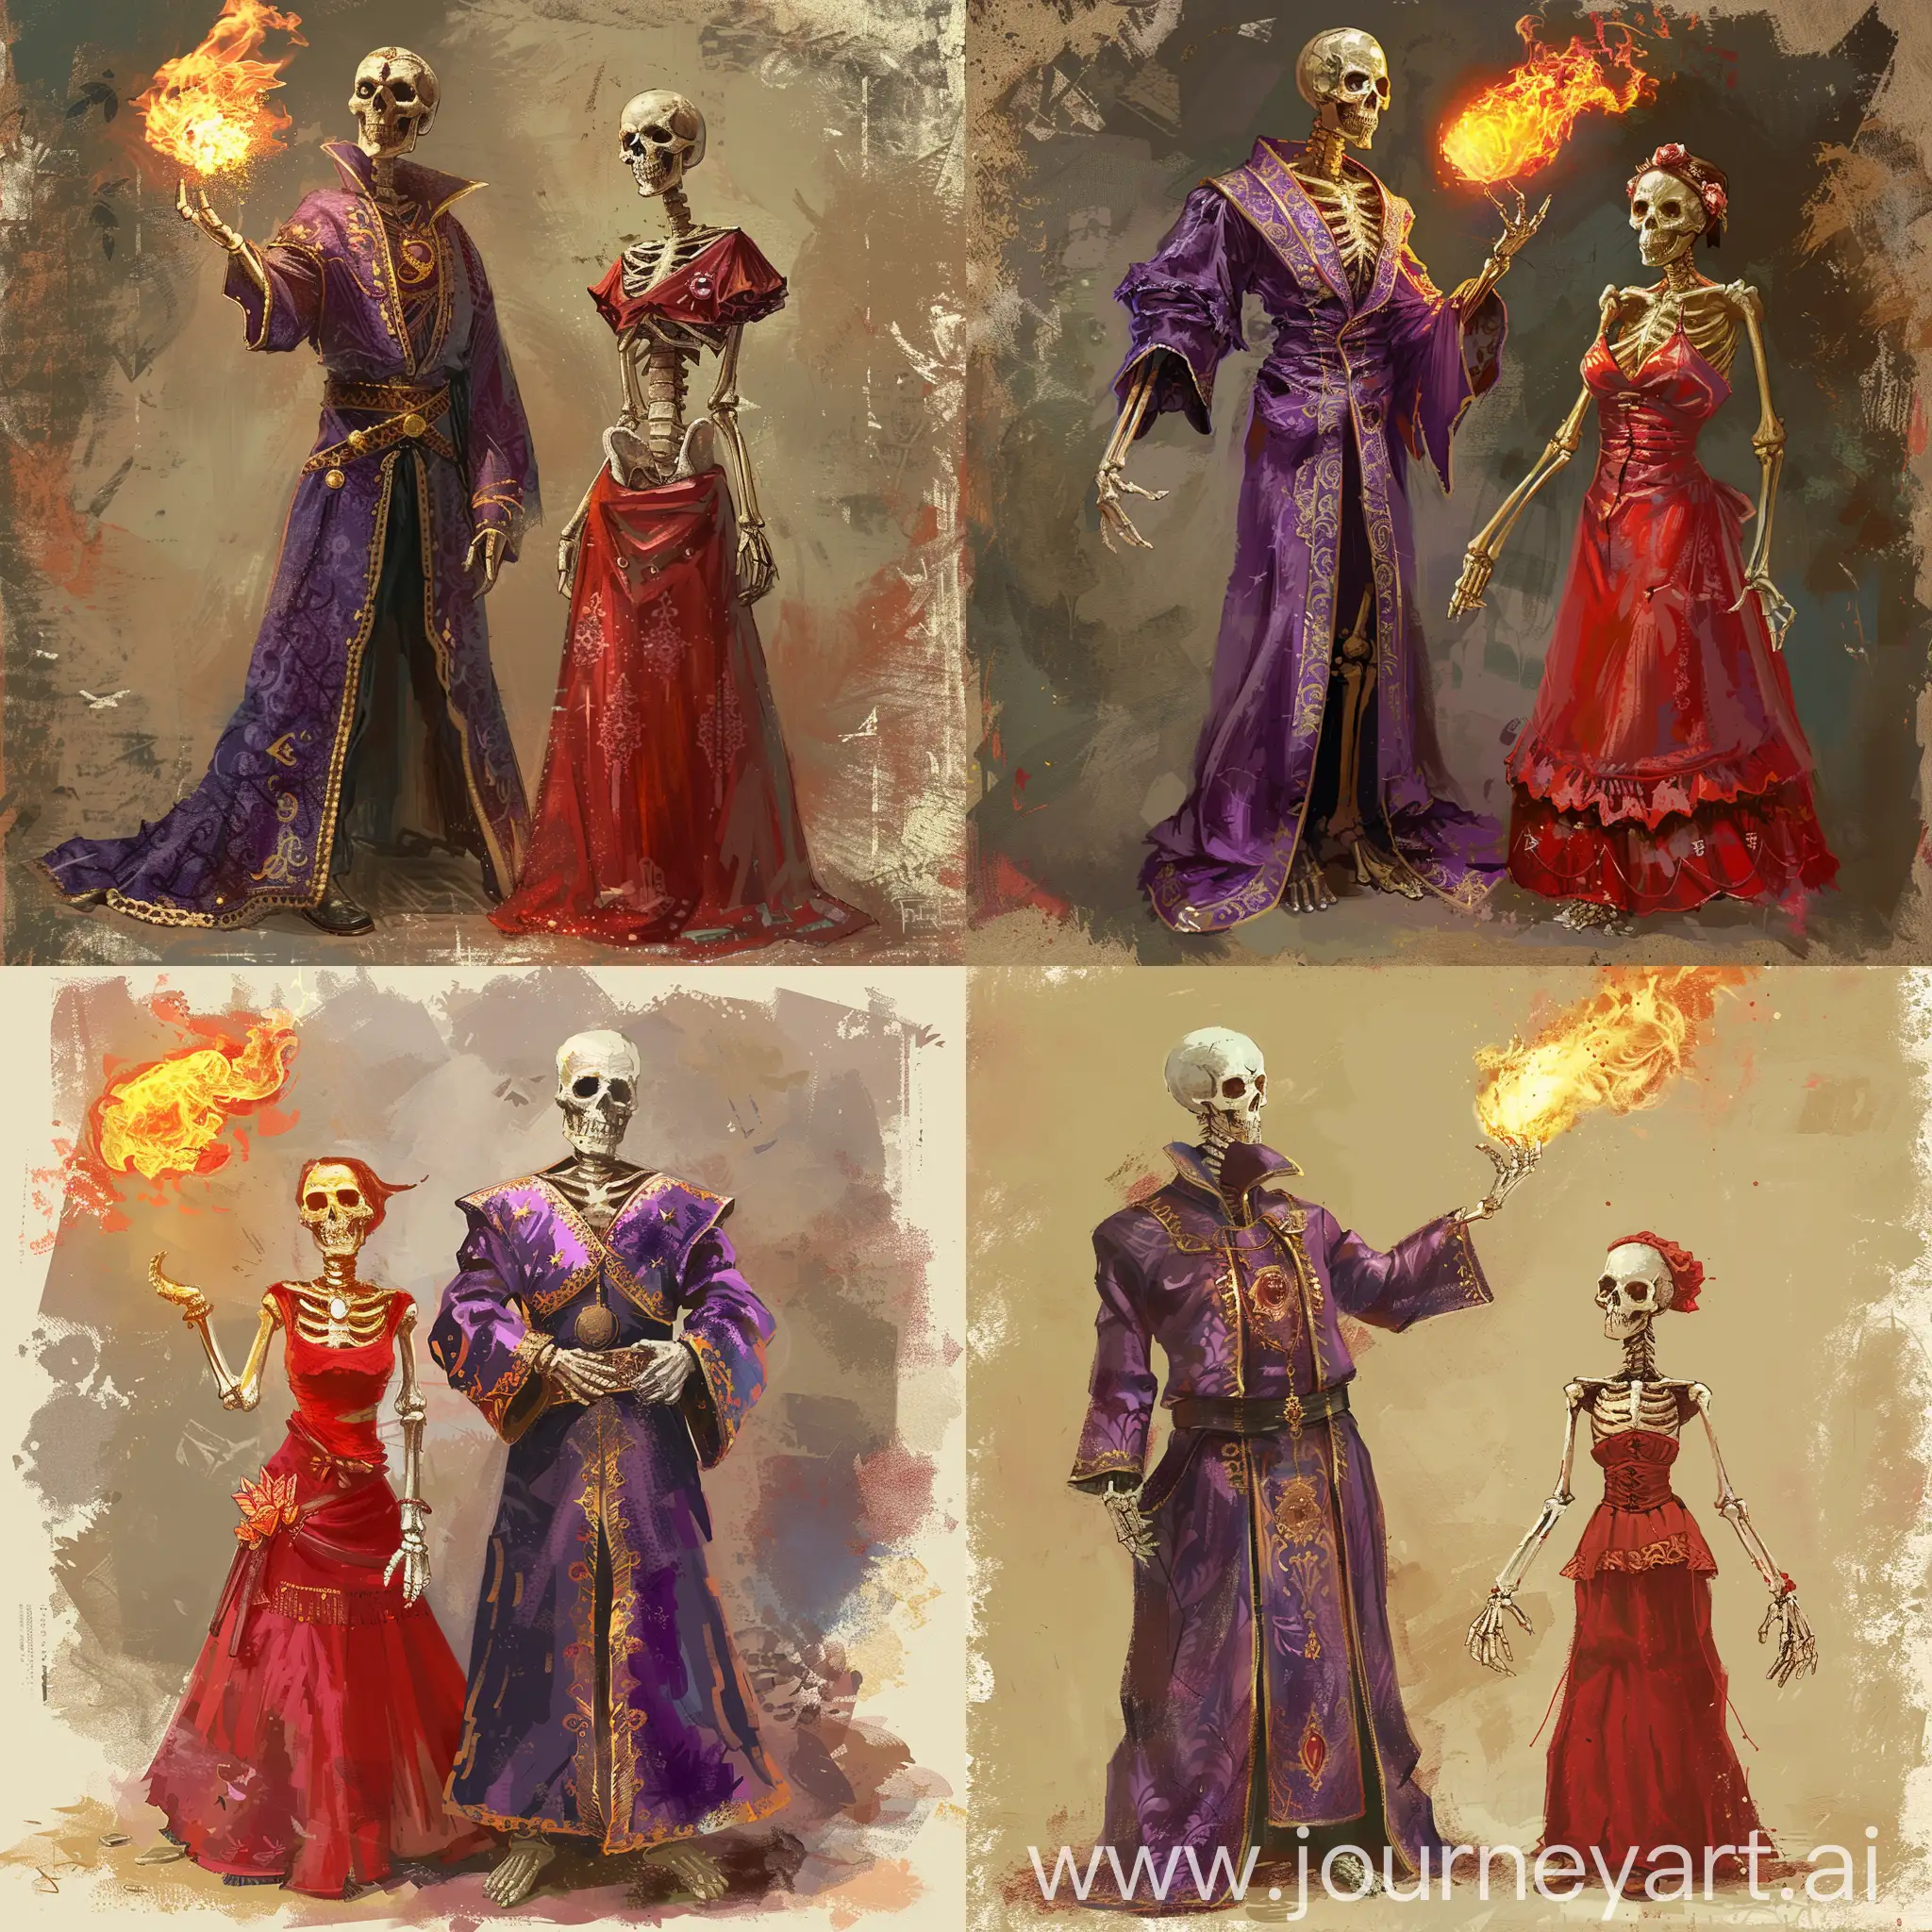 DnD portrait. Skeleton mage in an expensive purple robe with a fireball. Next to it stands a skeleton maid in a red dress.